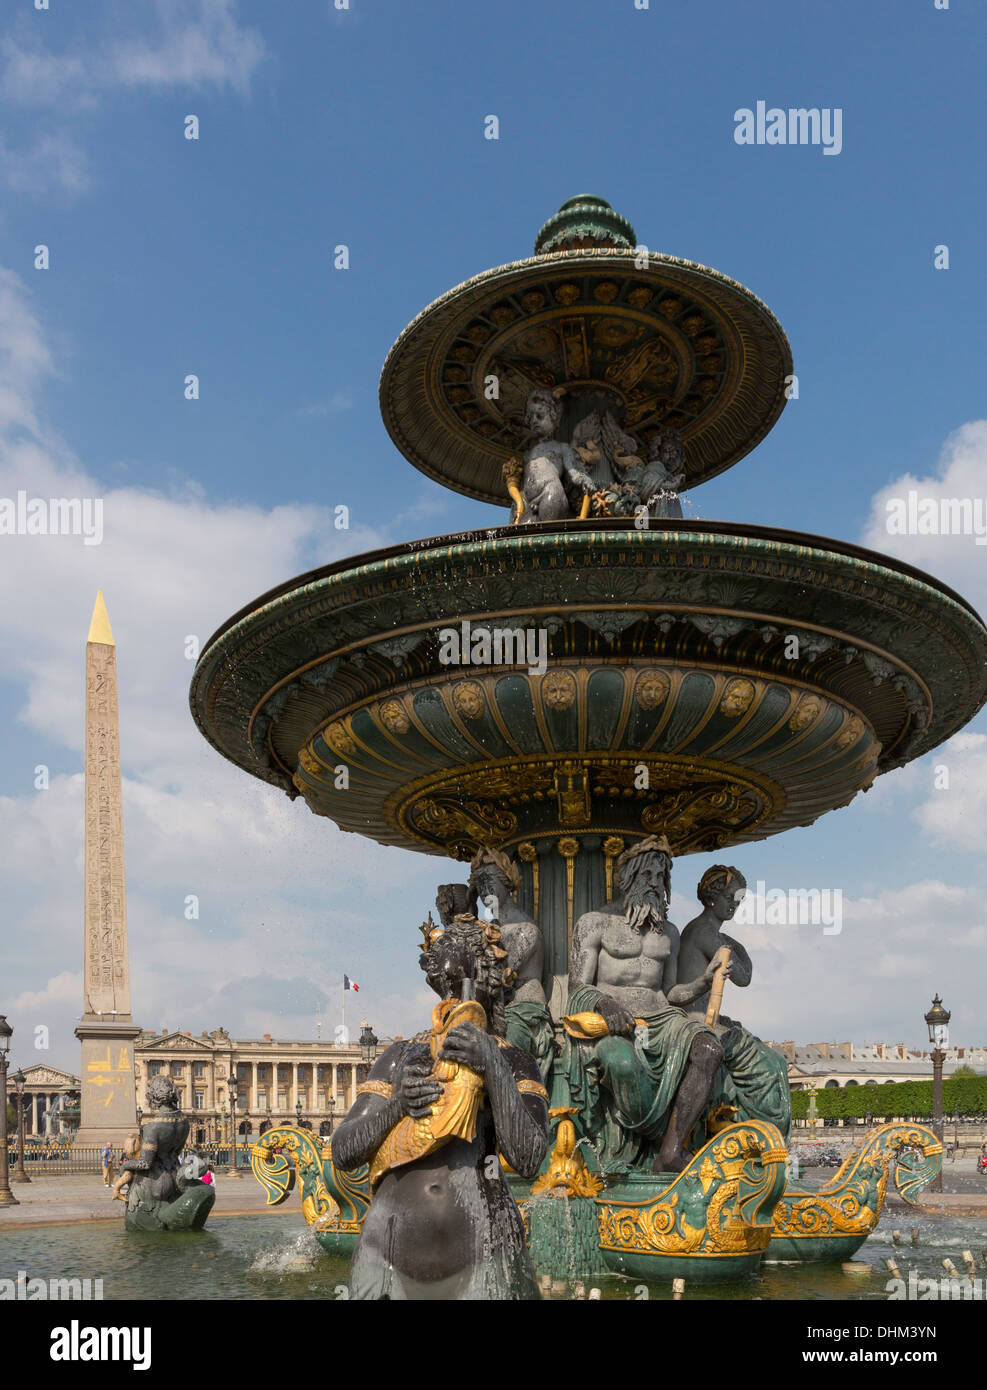 Fountain of River Commerce and Navigation with obelisk on the Champs Elysees in Paris, France. Stock Photo